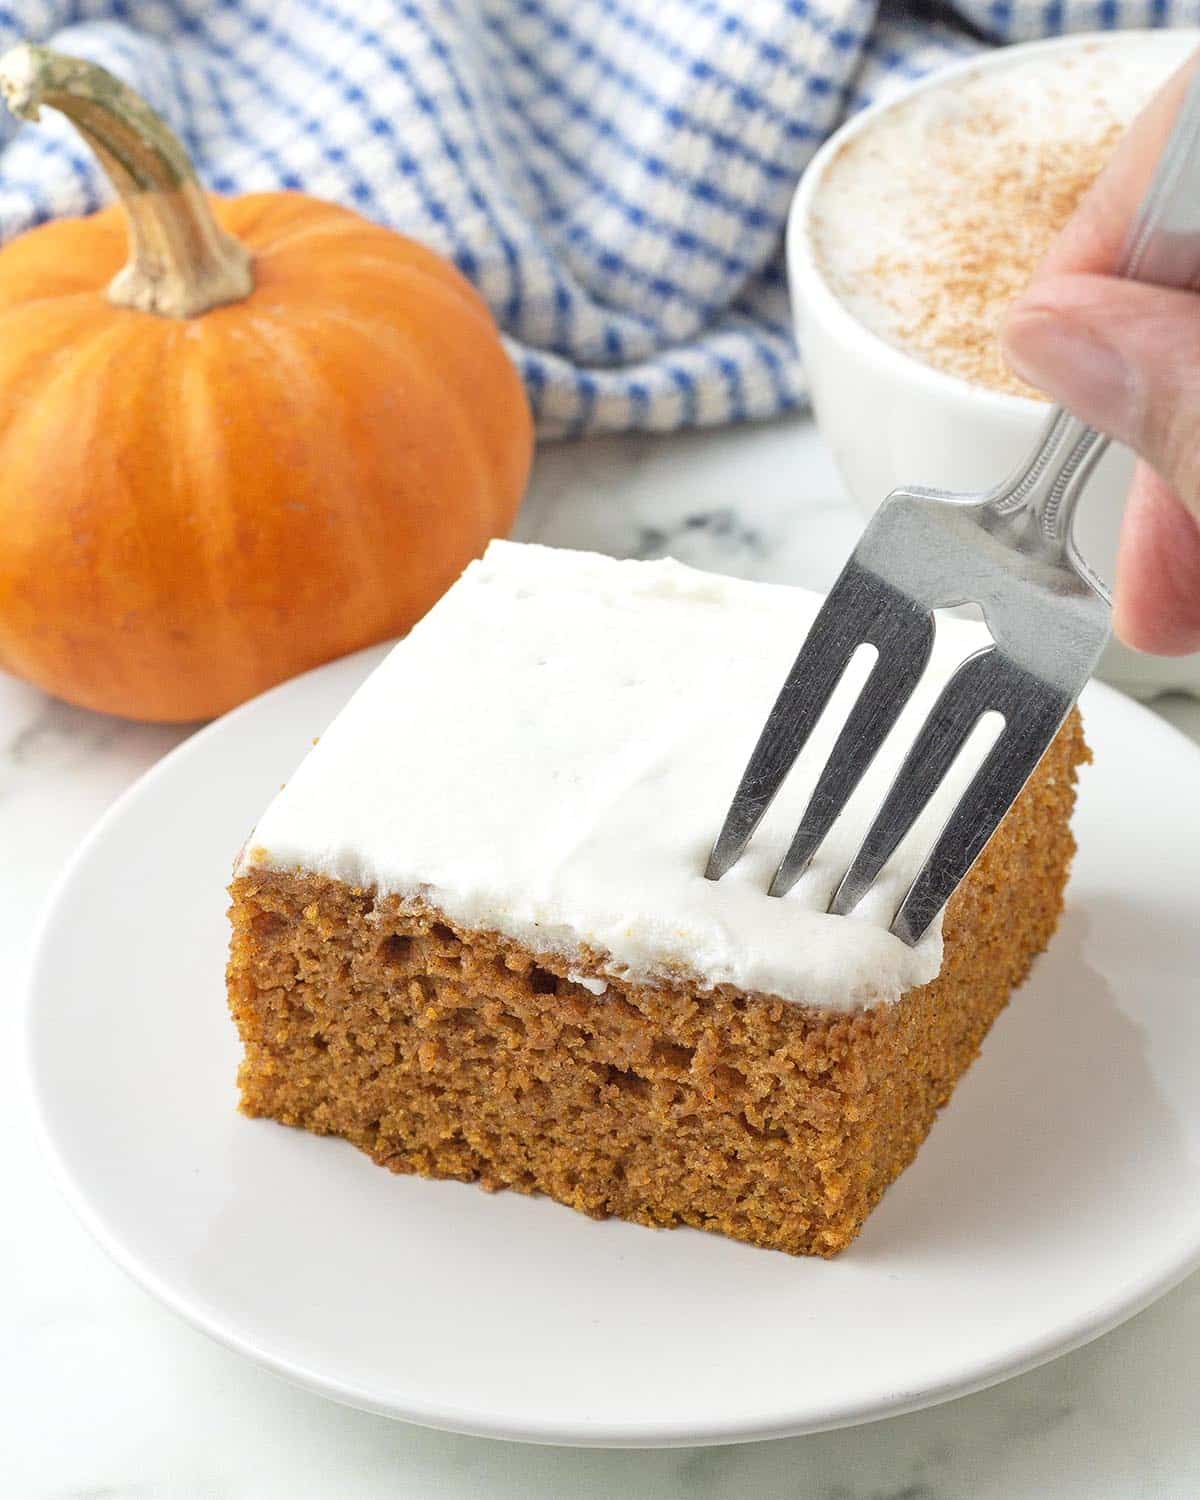 A hand holding a fork that is digging into a frosted vegan pumpkin bar.